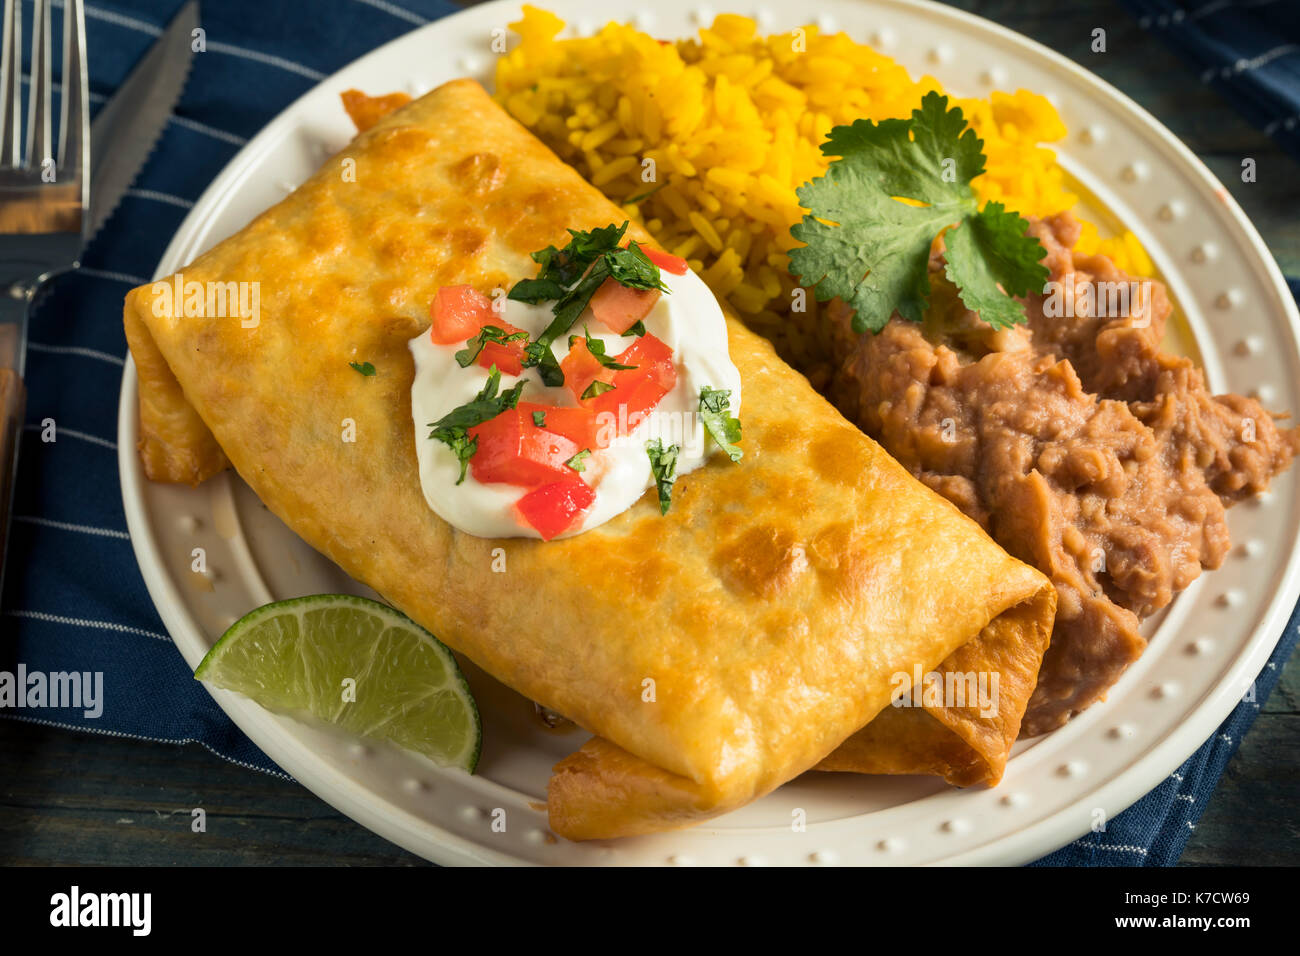 Deep Fried Beef Chimichanga Burrito with Rice and Beans Stock Photo